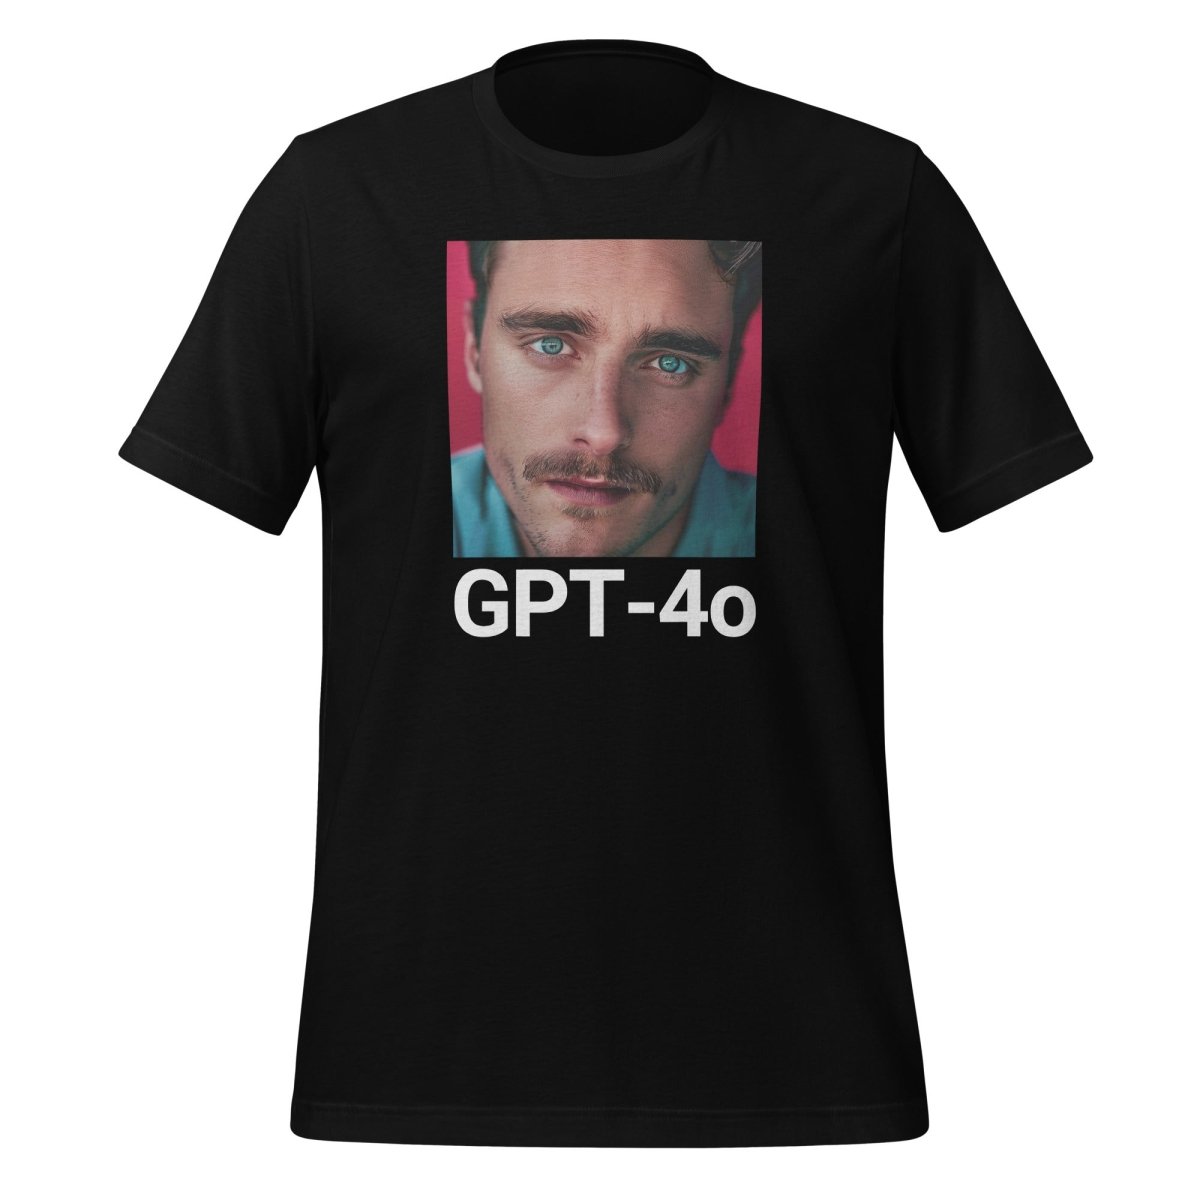 GPT - 4o is Her T - Shirt (unisex) - Black - AI Store